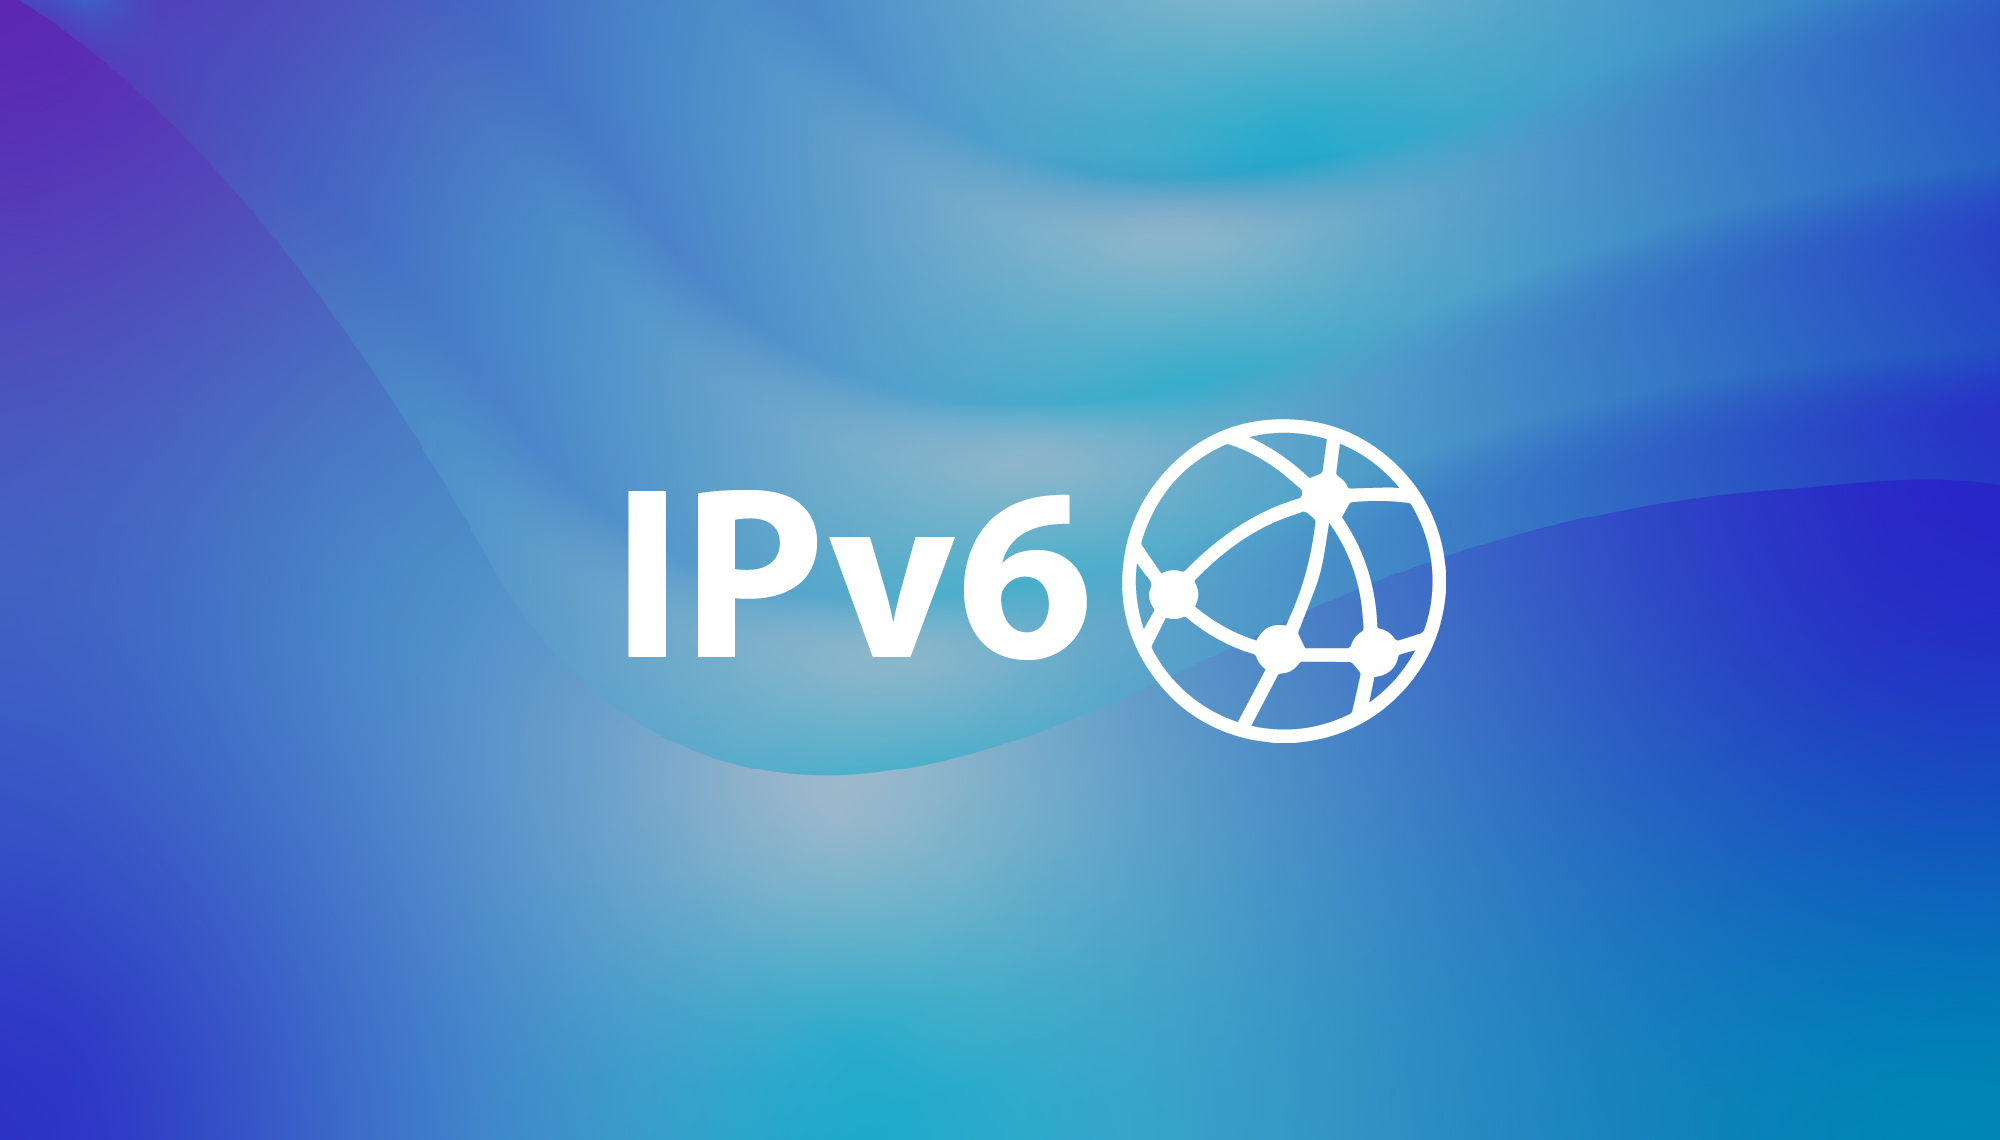 Can You Make IPv6 Work Commercially?